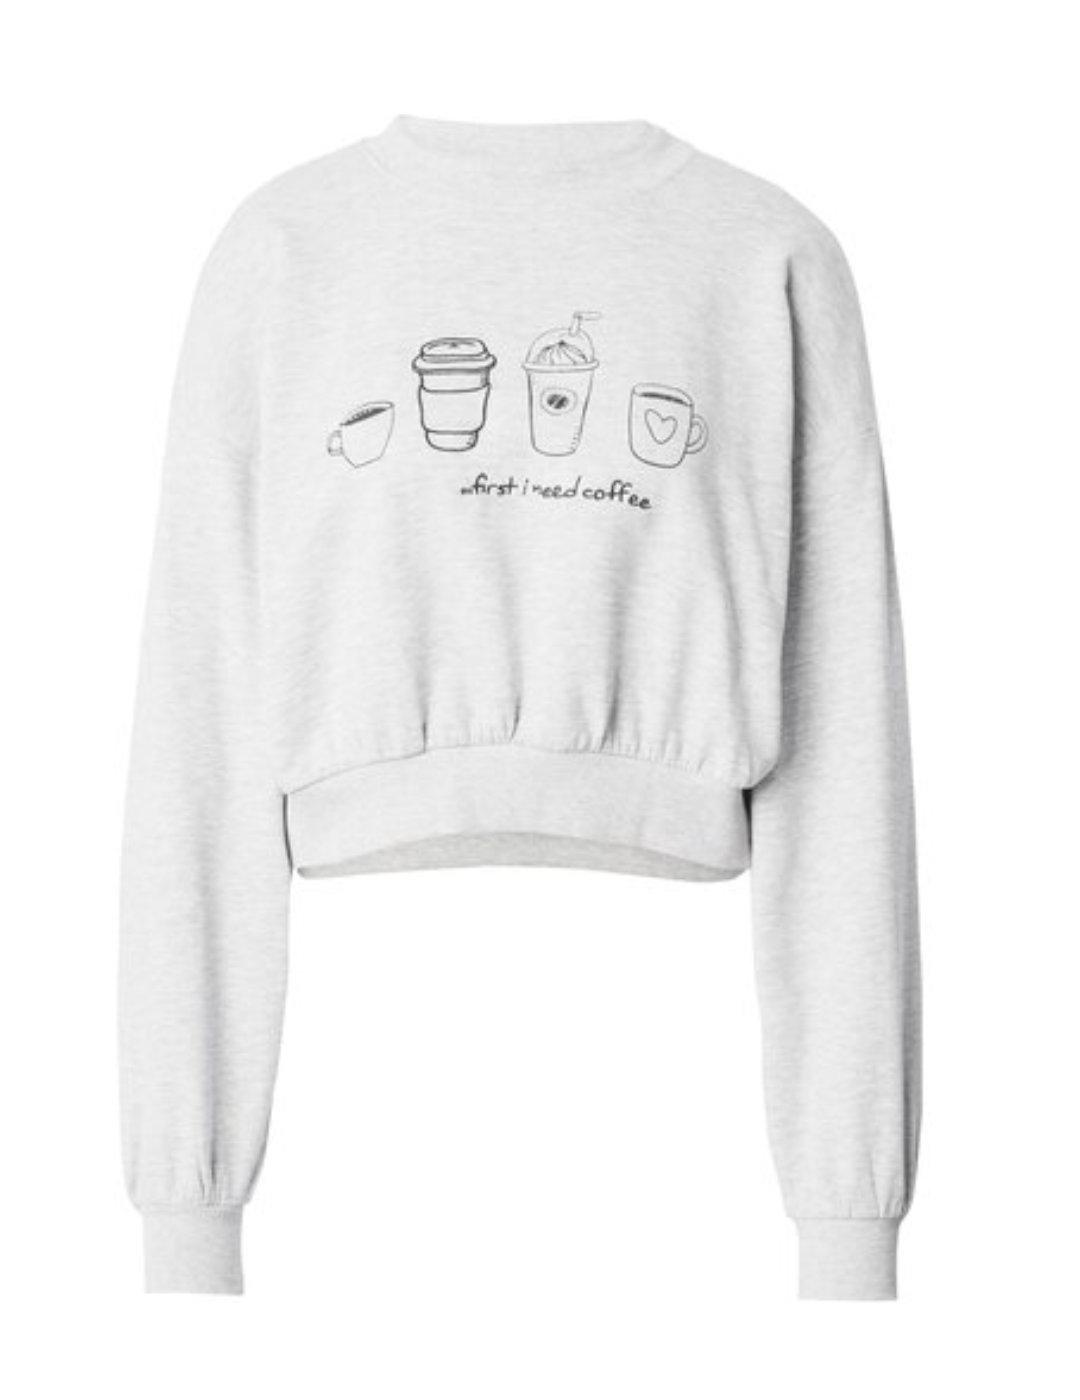 Sudadera Only Cate coffe gris sin capucha para mujer